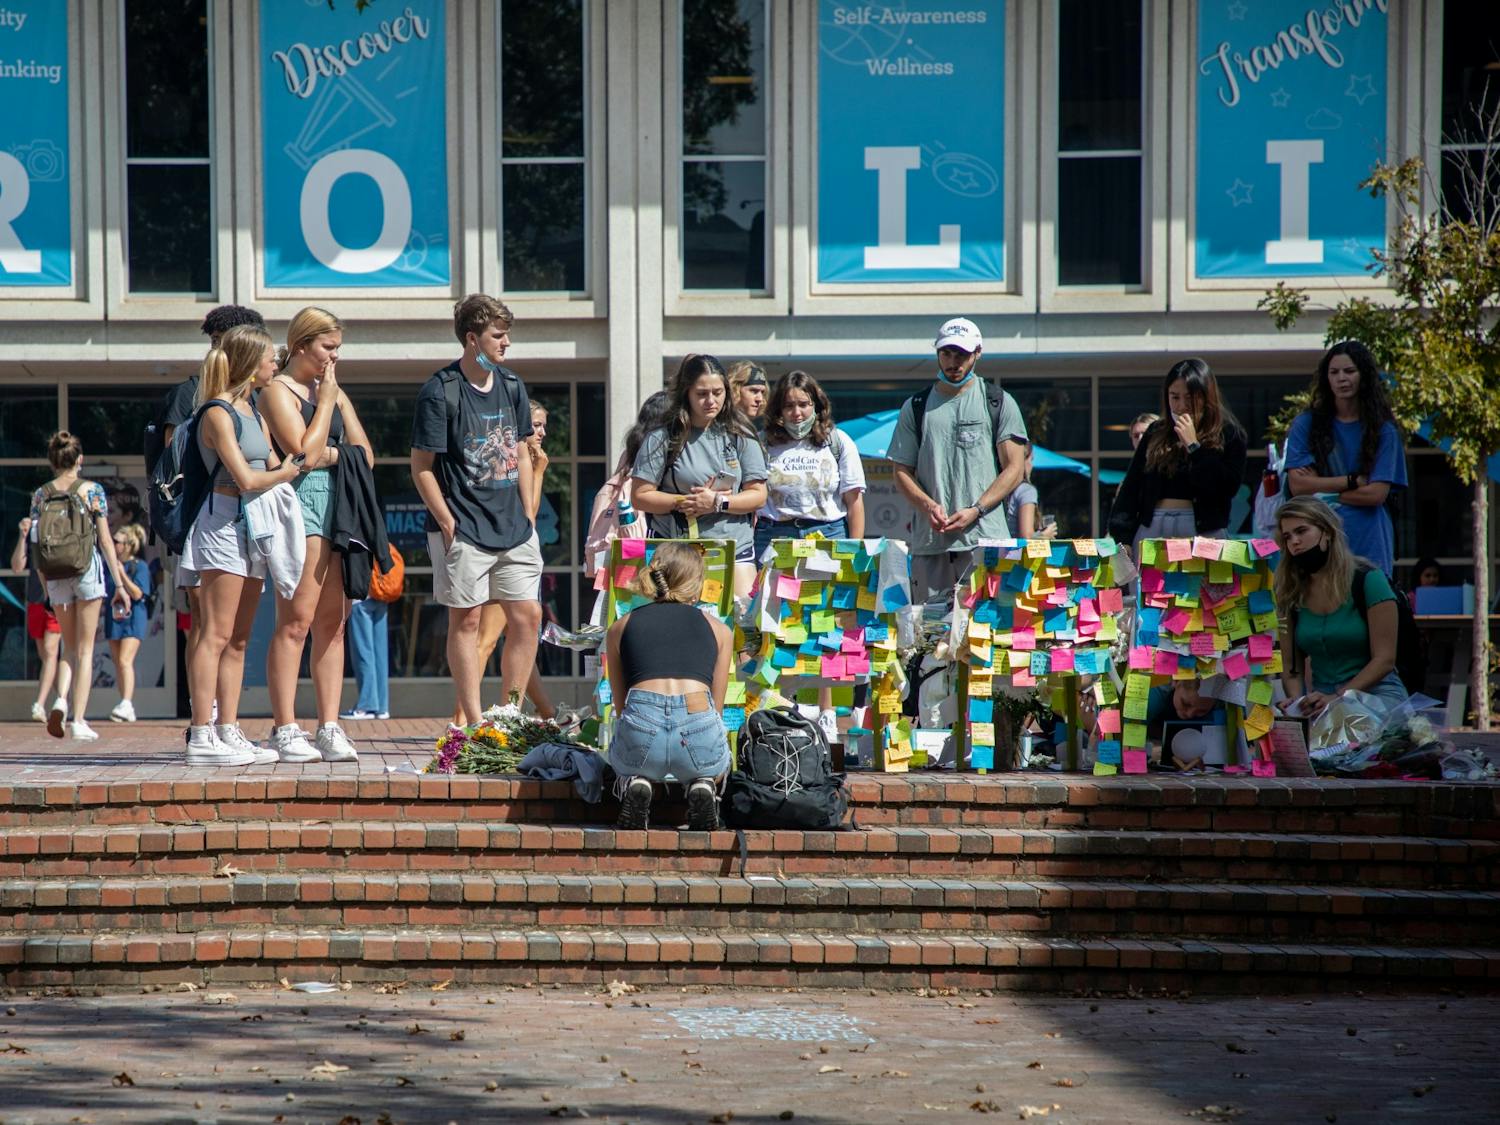 Content warning: This text contains mention of suicide.
Students add notes and flowers to the memorial in the Pit on Oct. 14, 2021. The memorial commemorates students who died by suicide during the fall 2021 semester.